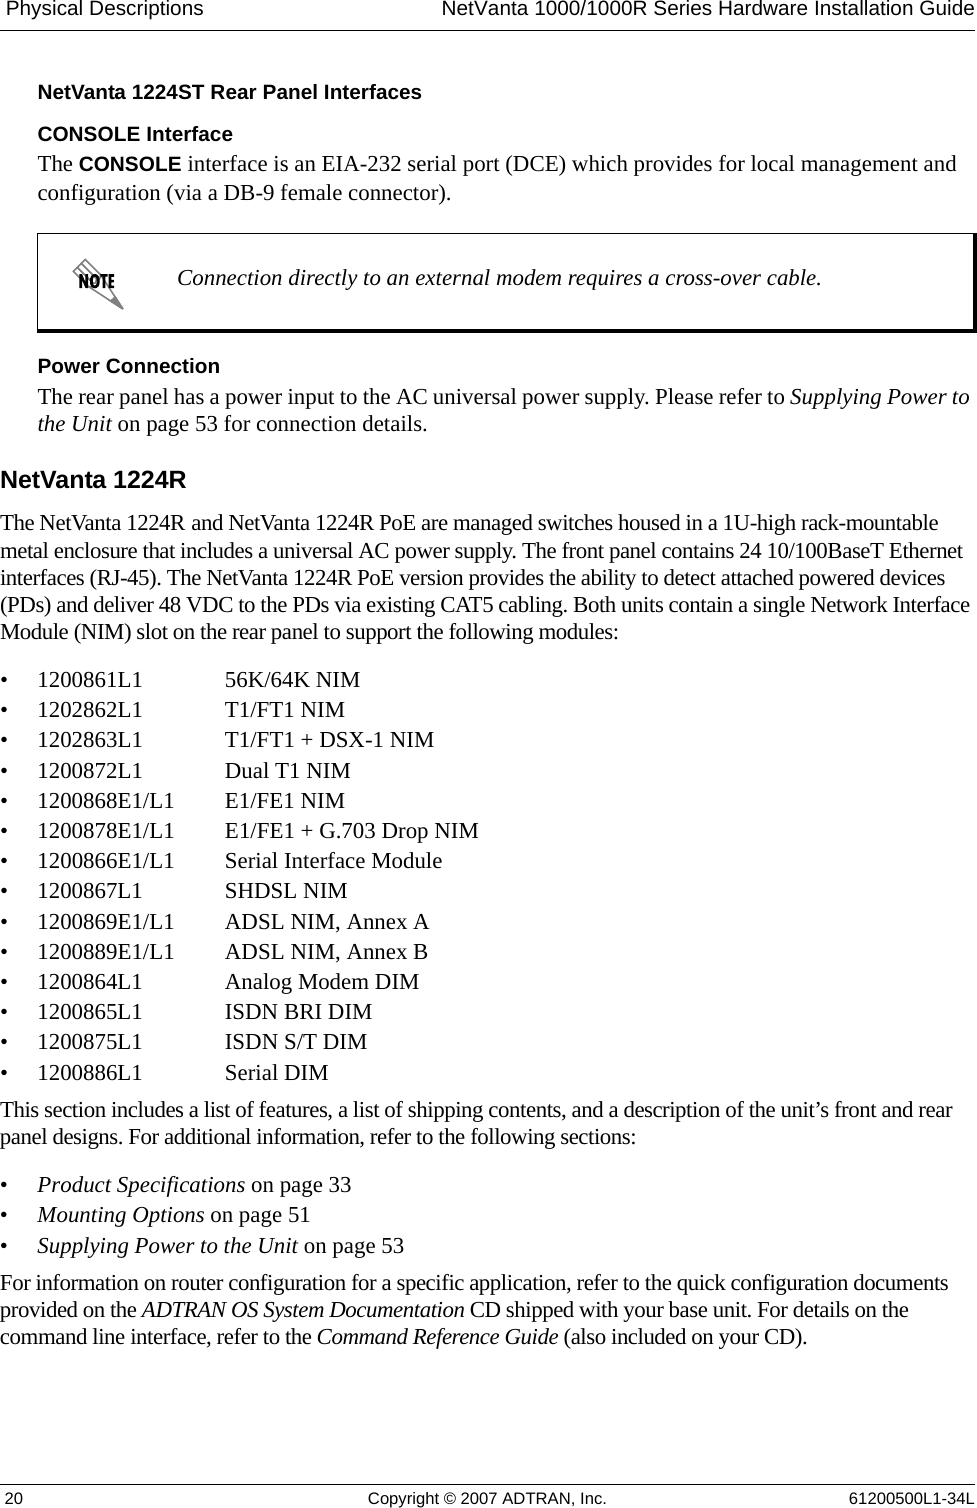  Physical Descriptions NetVanta 1000/1000R Series Hardware Installation Guide 20 Copyright © 2007 ADTRAN, Inc. 61200500L1-34LNetVanta 1224ST Rear Panel InterfacesCONSOLE InterfaceThe CONSOLE interface is an EIA-232 serial port (DCE) which provides for local management and configuration (via a DB-9 female connector).Power ConnectionThe rear panel has a power input to the AC universal power supply. Please refer to Supplying Power to the Unit on page 53 for connection details.NetVanta 1224R The NetVanta 1224R and NetVanta 1224R PoE are managed switches housed in a 1U-high rack-mountable metal enclosure that includes a universal AC power supply. The front panel contains 24 10/100BaseT Ethernet interfaces (RJ-45). The NetVanta 1224R PoE version provides the ability to detect attached powered devices (PDs) and deliver 48 VDC to the PDs via existing CAT5 cabling. Both units contain a single Network Interface Module (NIM) slot on the rear panel to support the following modules:• 1200861L1 56K/64K NIM• 1202862L1 T1/FT1 NIM• 1202863L1 T1/FT1 + DSX-1 NIM• 1200872L1 Dual T1 NIM• 1200868E1/L1 E1/FE1 NIM• 1200878E1/L1 E1/FE1 + G.703 Drop NIM• 1200866E1/L1 Serial Interface Module• 1200867L1 SHDSL NIM• 1200869E1/L1 ADSL NIM, Annex A• 1200889E1/L1 ADSL NIM, Annex B• 1200864L1 Analog Modem DIM• 1200865L1 ISDN BRI DIM• 1200875L1 ISDN S/T DIM• 1200886L1 Serial DIMThis section includes a list of features, a list of shipping contents, and a description of the unit’s front and rear panel designs. For additional information, refer to the following sections:•Product Specifications on page 33•Mounting Options on page 51•Supplying Power to the Unit on page 53For information on router configuration for a specific application, refer to the quick configuration documents provided on the ADTRAN OS System Documentation CD shipped with your base unit. For details on the command line interface, refer to the Command Reference Guide (also included on your CD). Connection directly to an external modem requires a cross-over cable.